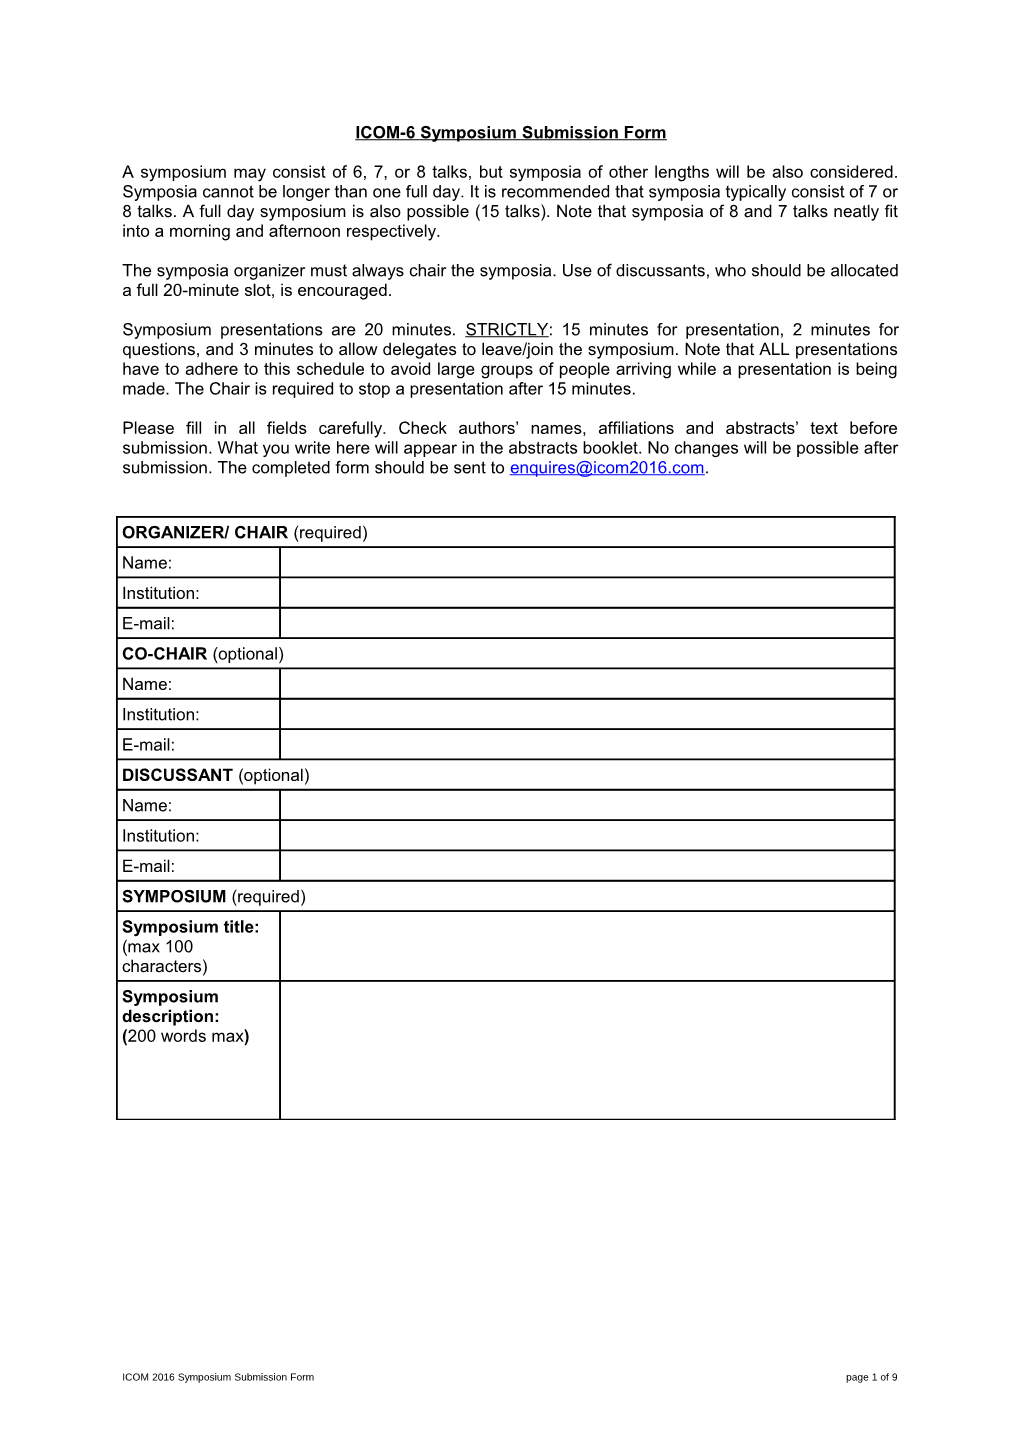 BCCCD Symposium Submission Form